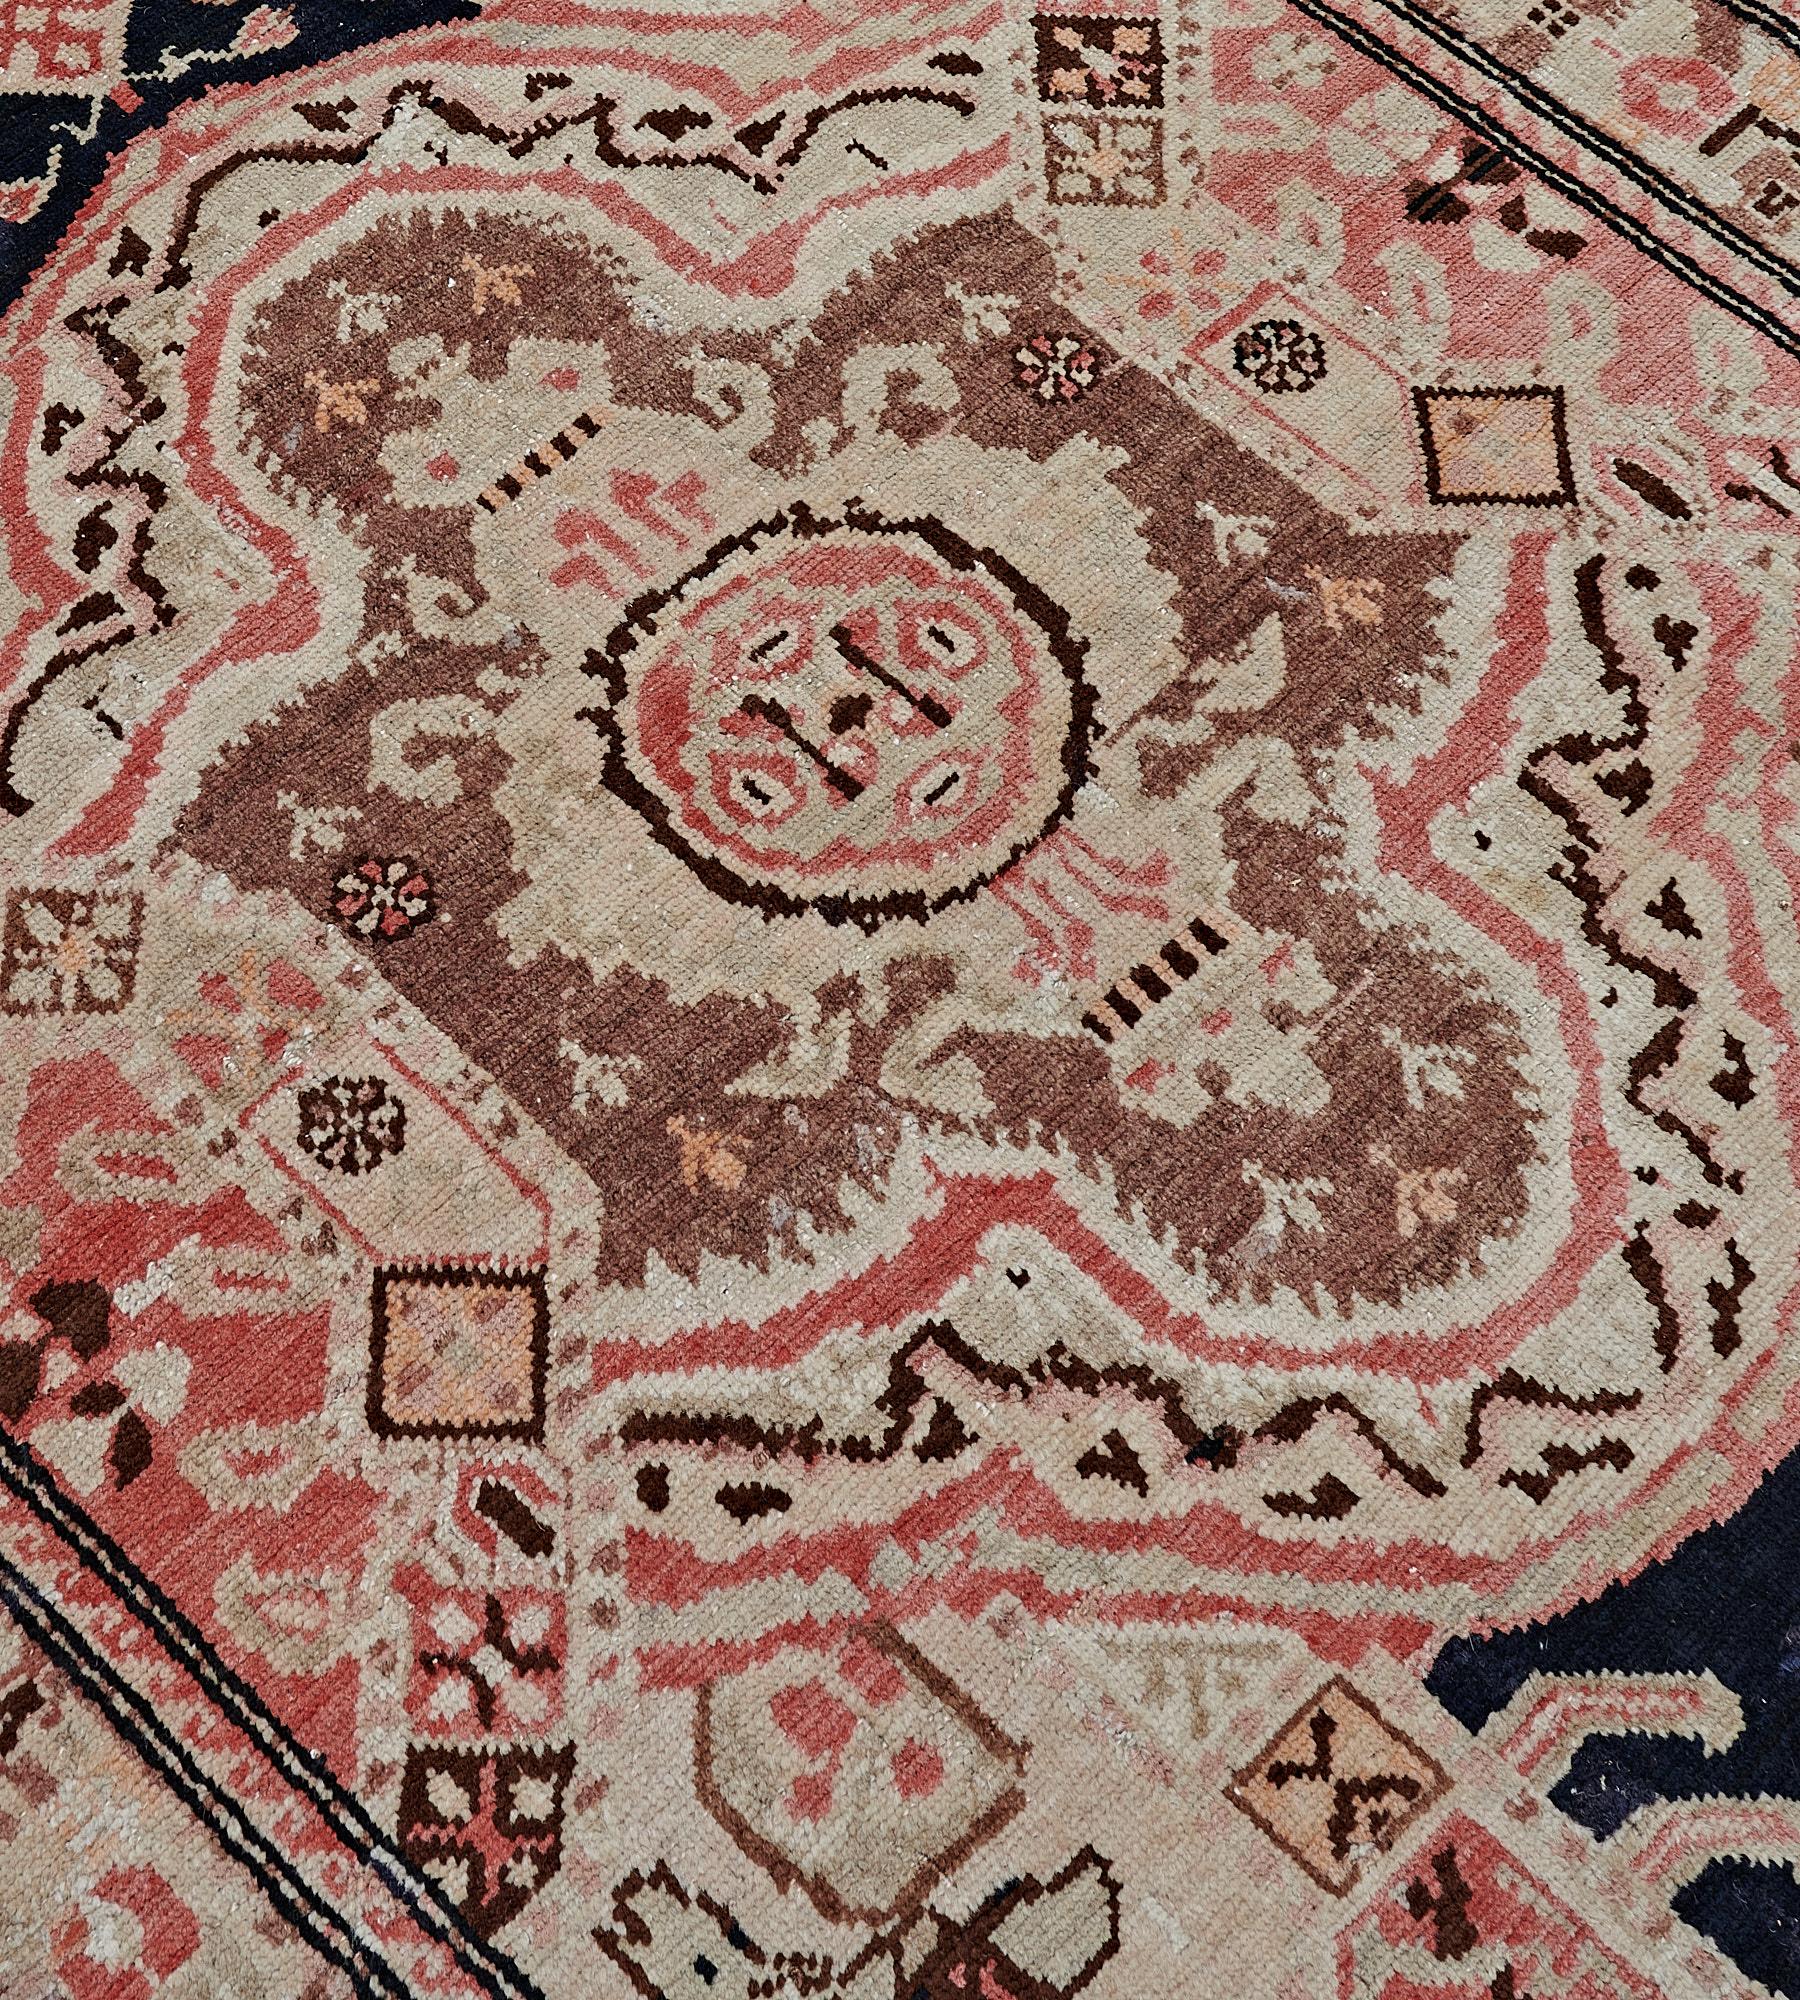 This antique, circa 1900, Karabagh runner has a charcoal-blue field with a central column of ivory and brick-red cusped lozenges alternating with fox-brown lozenges each containing a central rosette surrounded by floral motifs, flanked at each side